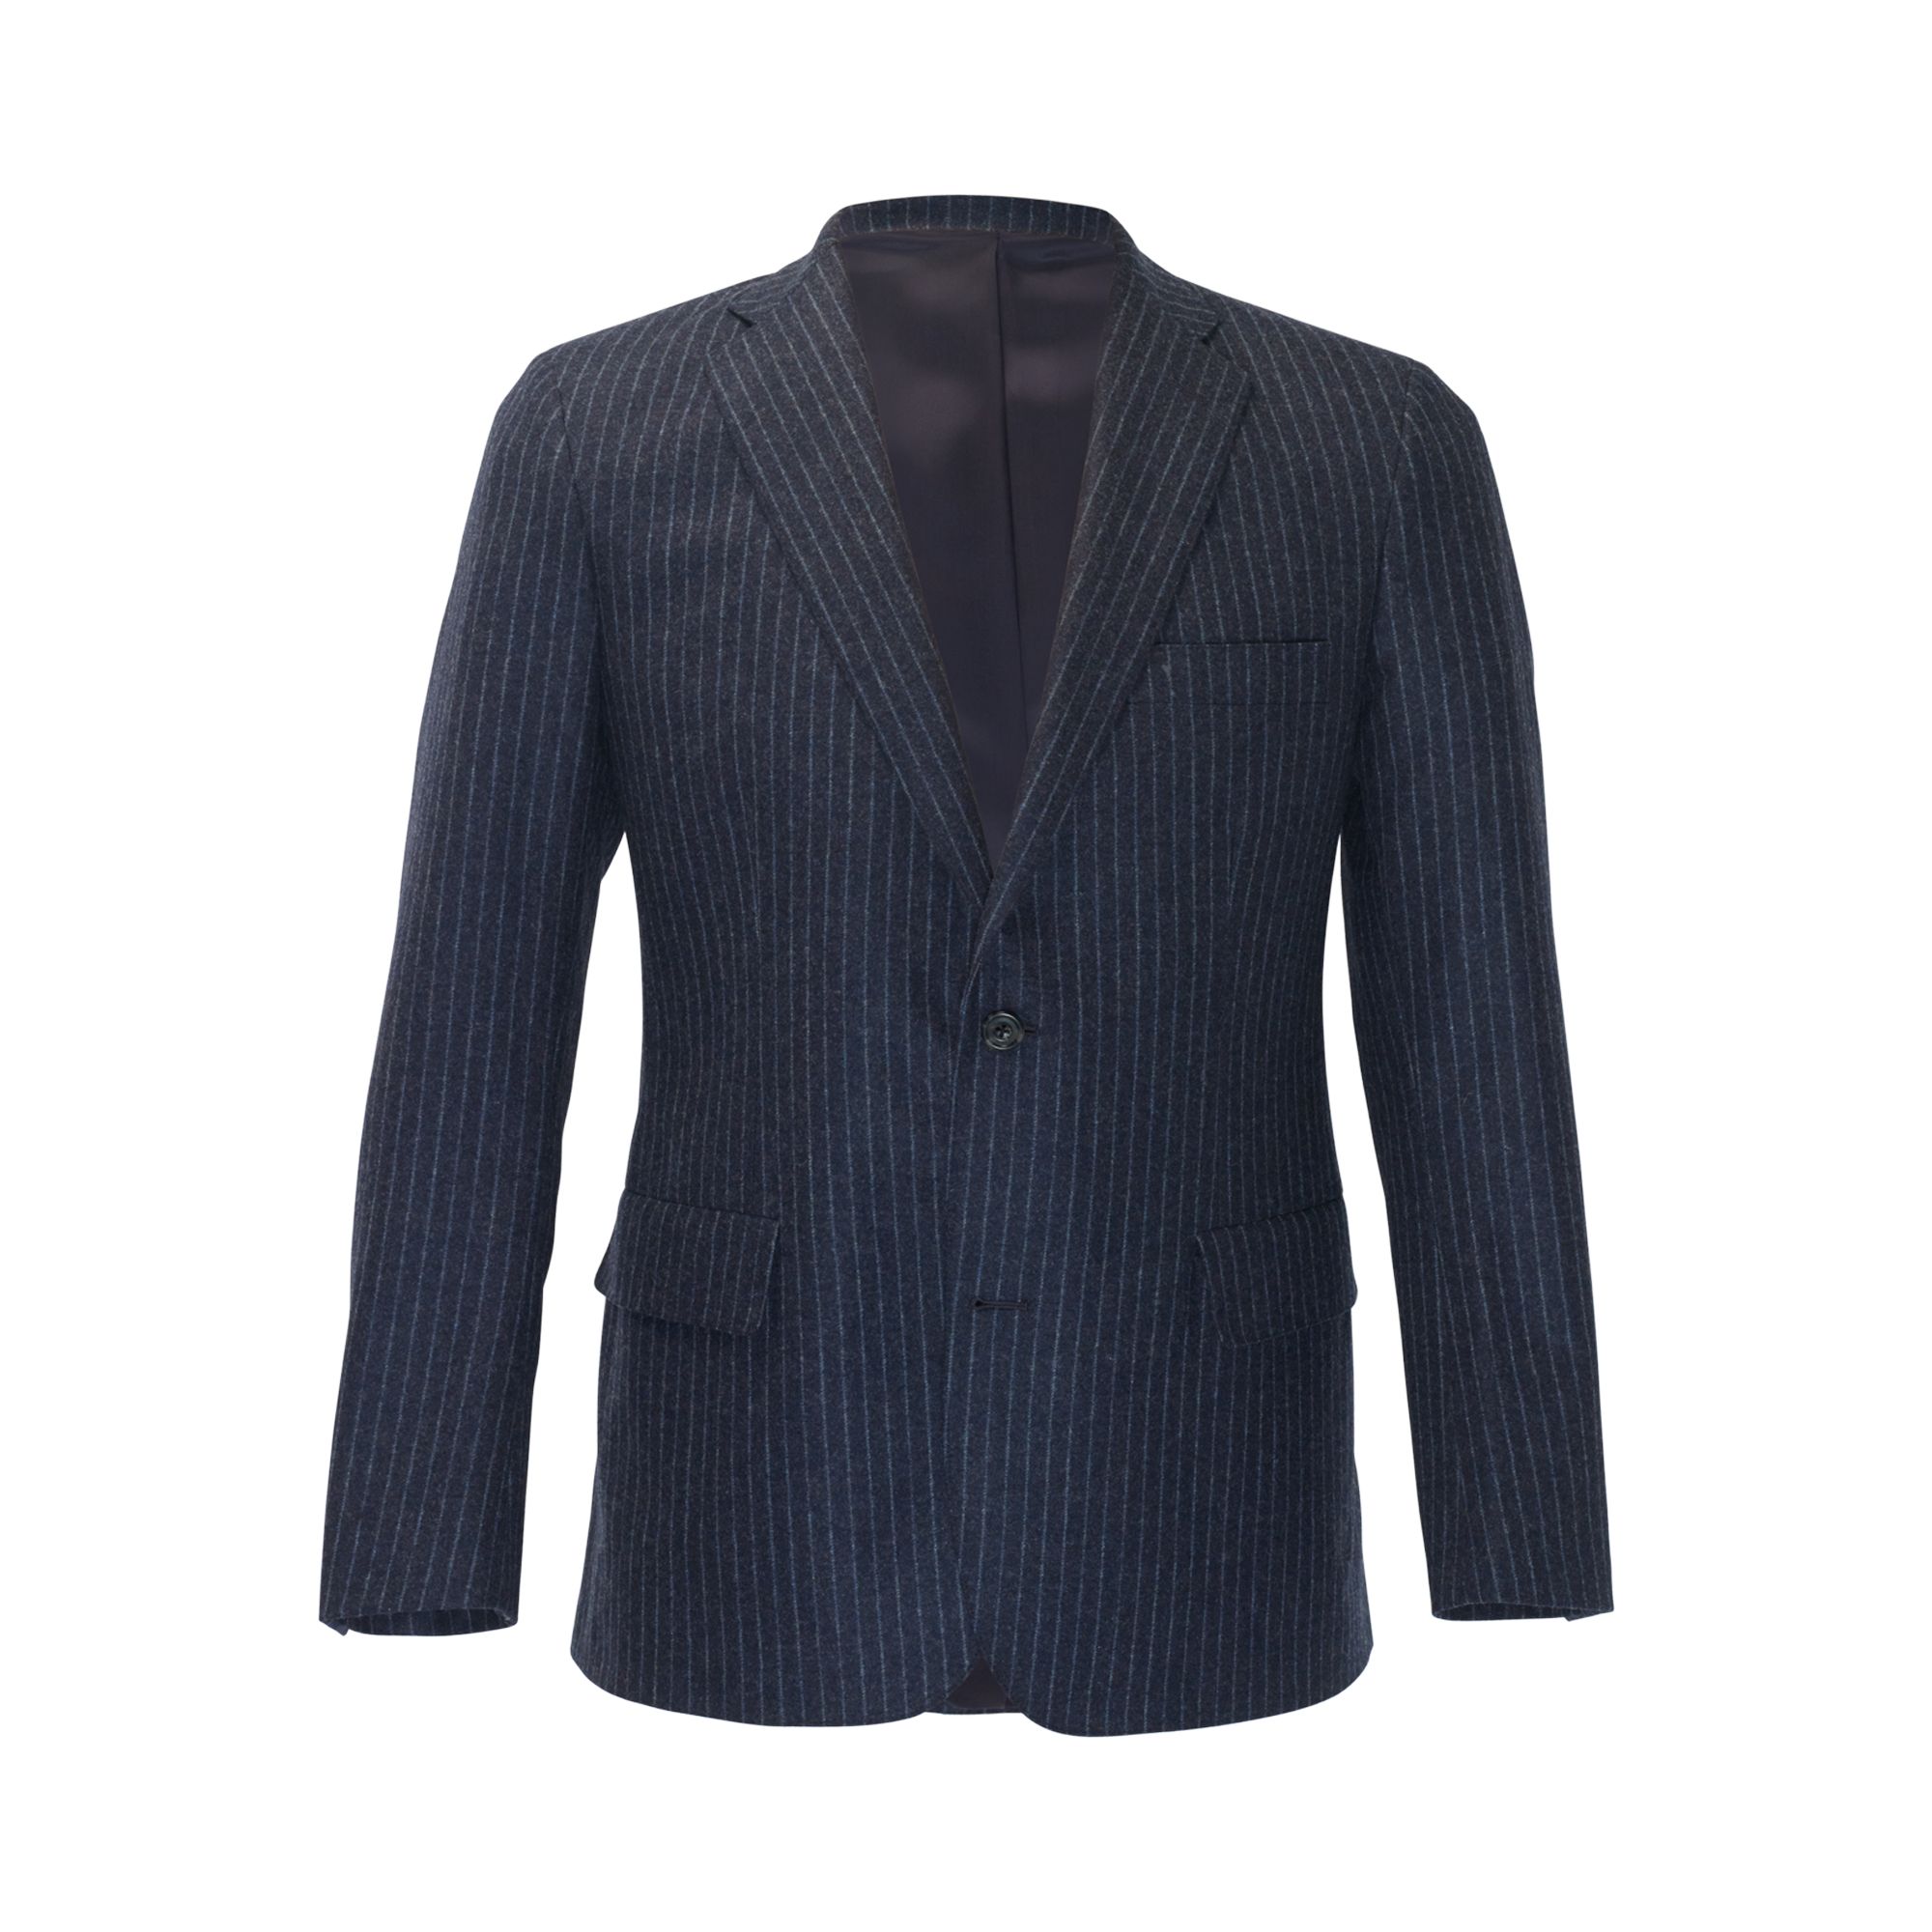 Lyst - Club Monaco Made In The Usa Suit Blazer in Blue for Men